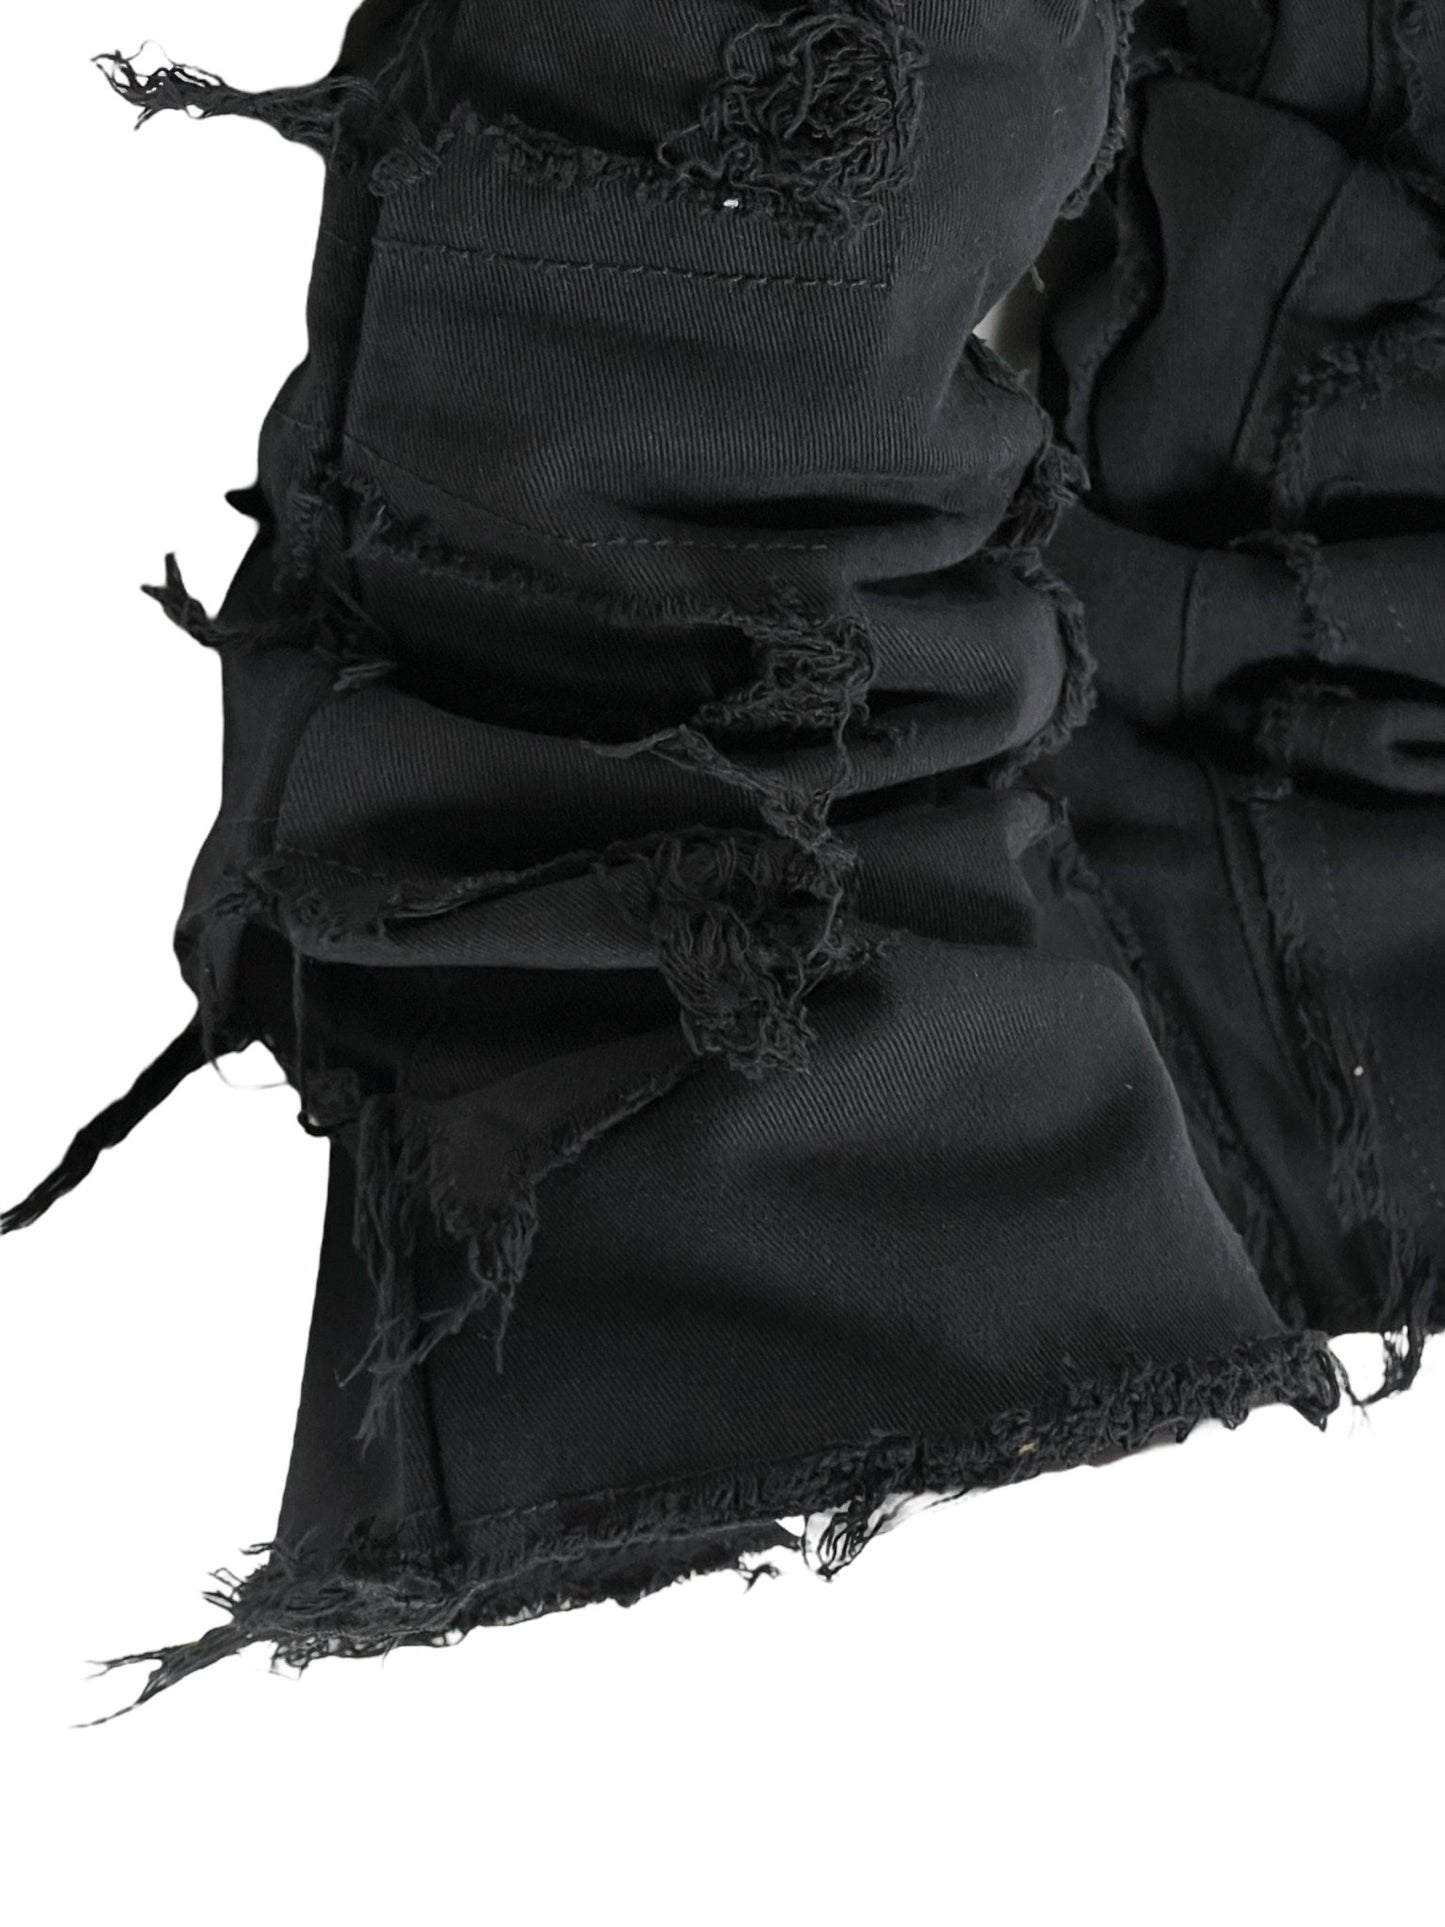 Close-up of a GUAPI OBSIDIAN BLACK BLOOD DIAMOND STACKED DENIM garment with distressed and frayed fabric textures.